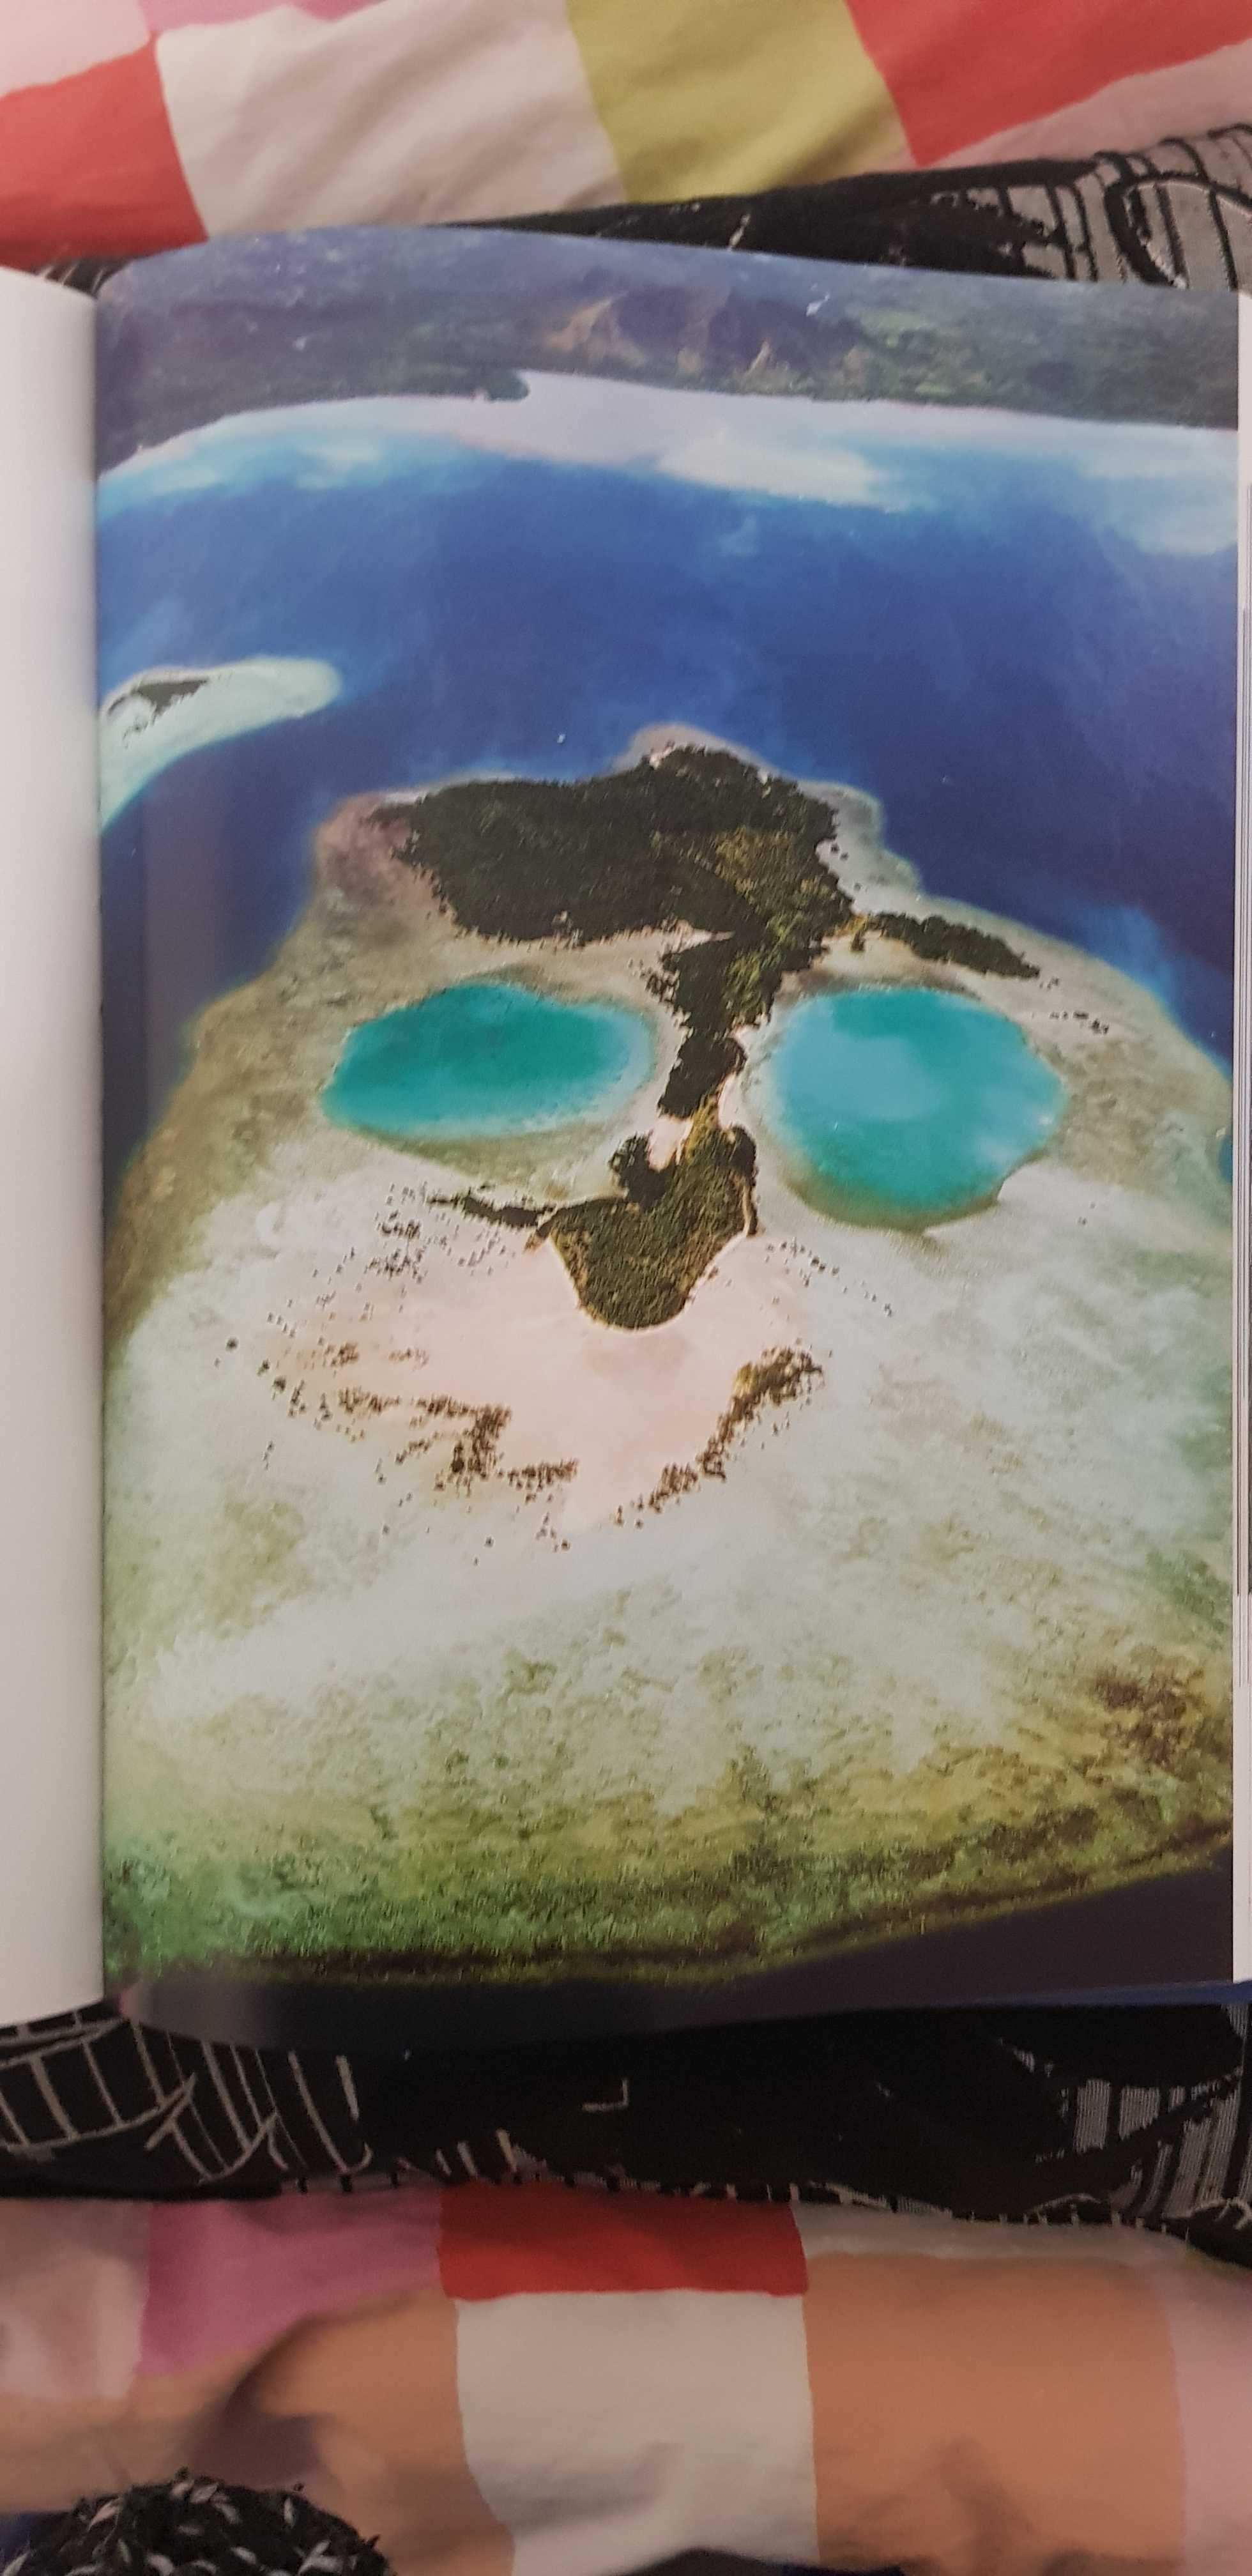 80Islands to escape happilyever afterNational Geographic350x250/300стр